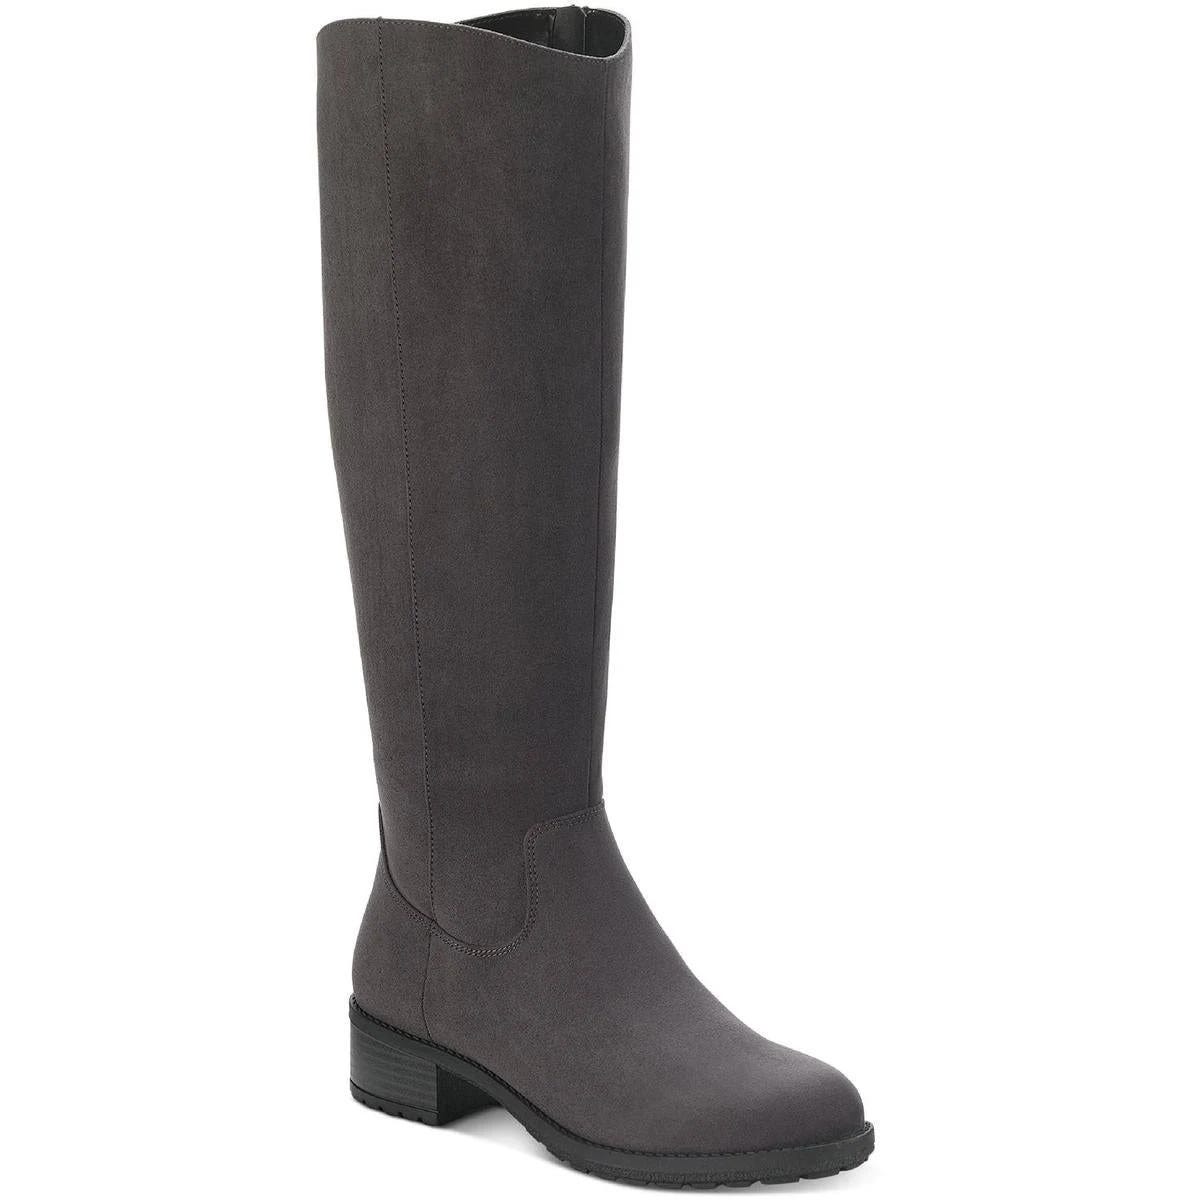 Chic Faux Leather Knee-High Boots for Women | Image